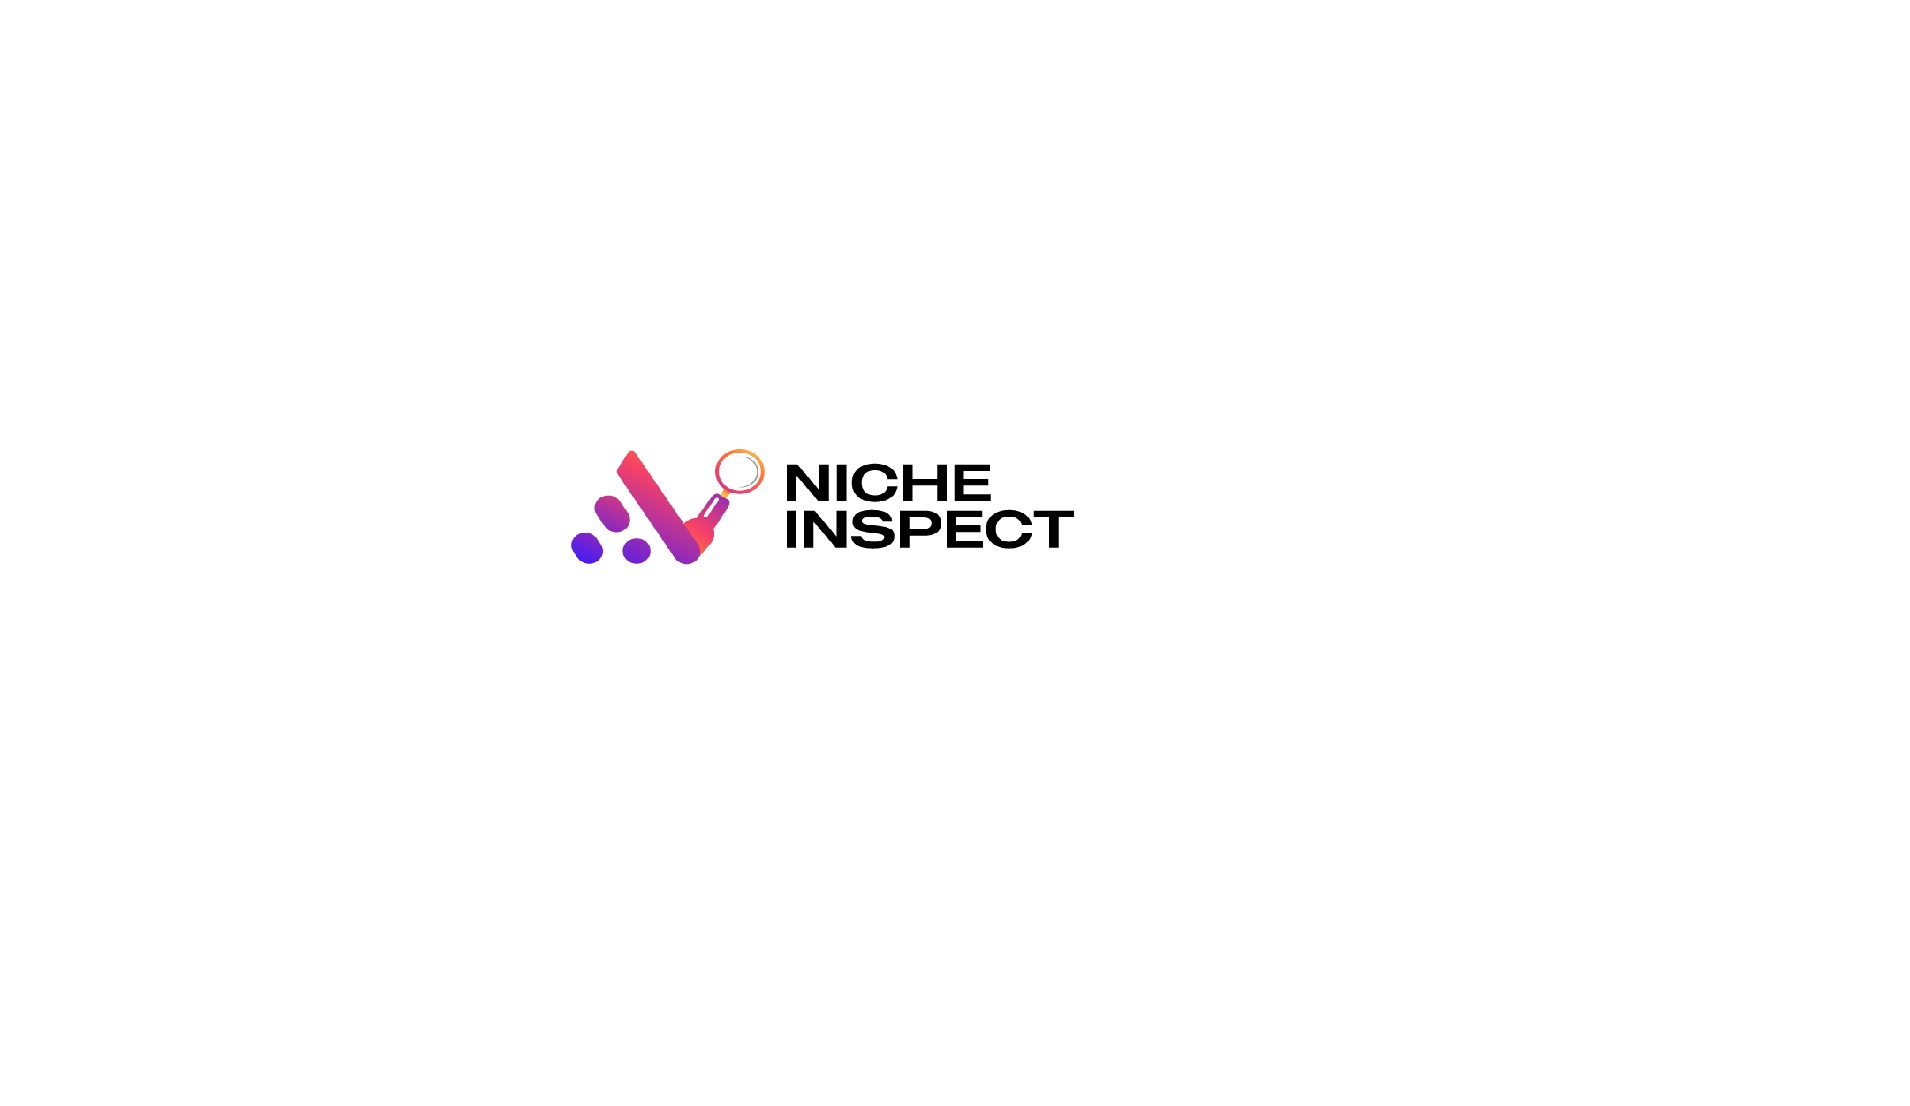  Niche Inspect is your partner for effortless shopping experience